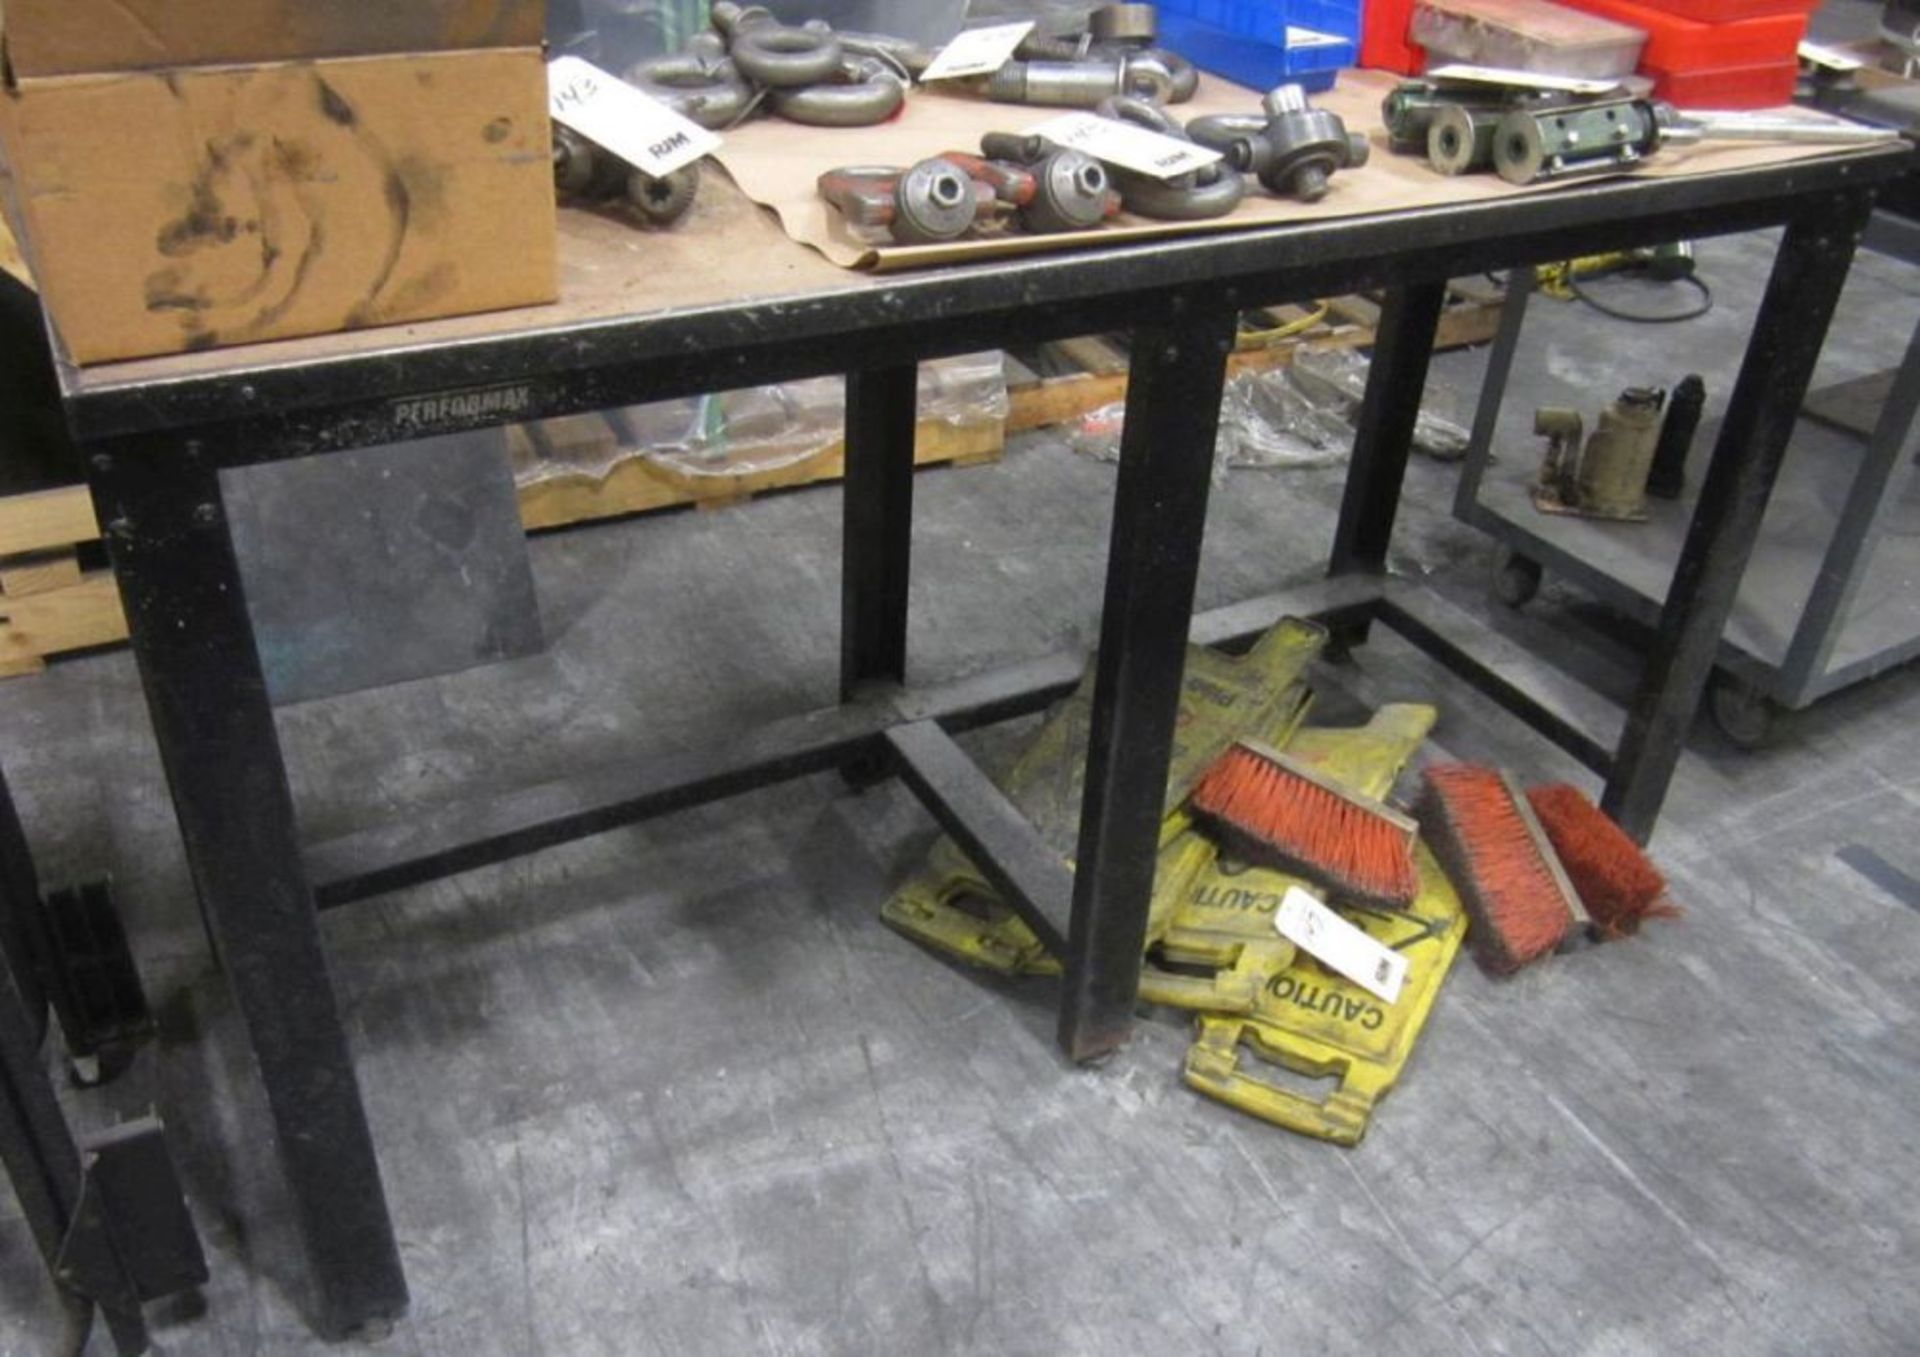 2 STEEL FRAMEWORK BENCHES (1 PORTABLE) (NOTE: THIS ITEM CAN NOT BE REMOVED UNTIL THE SECOND DAY